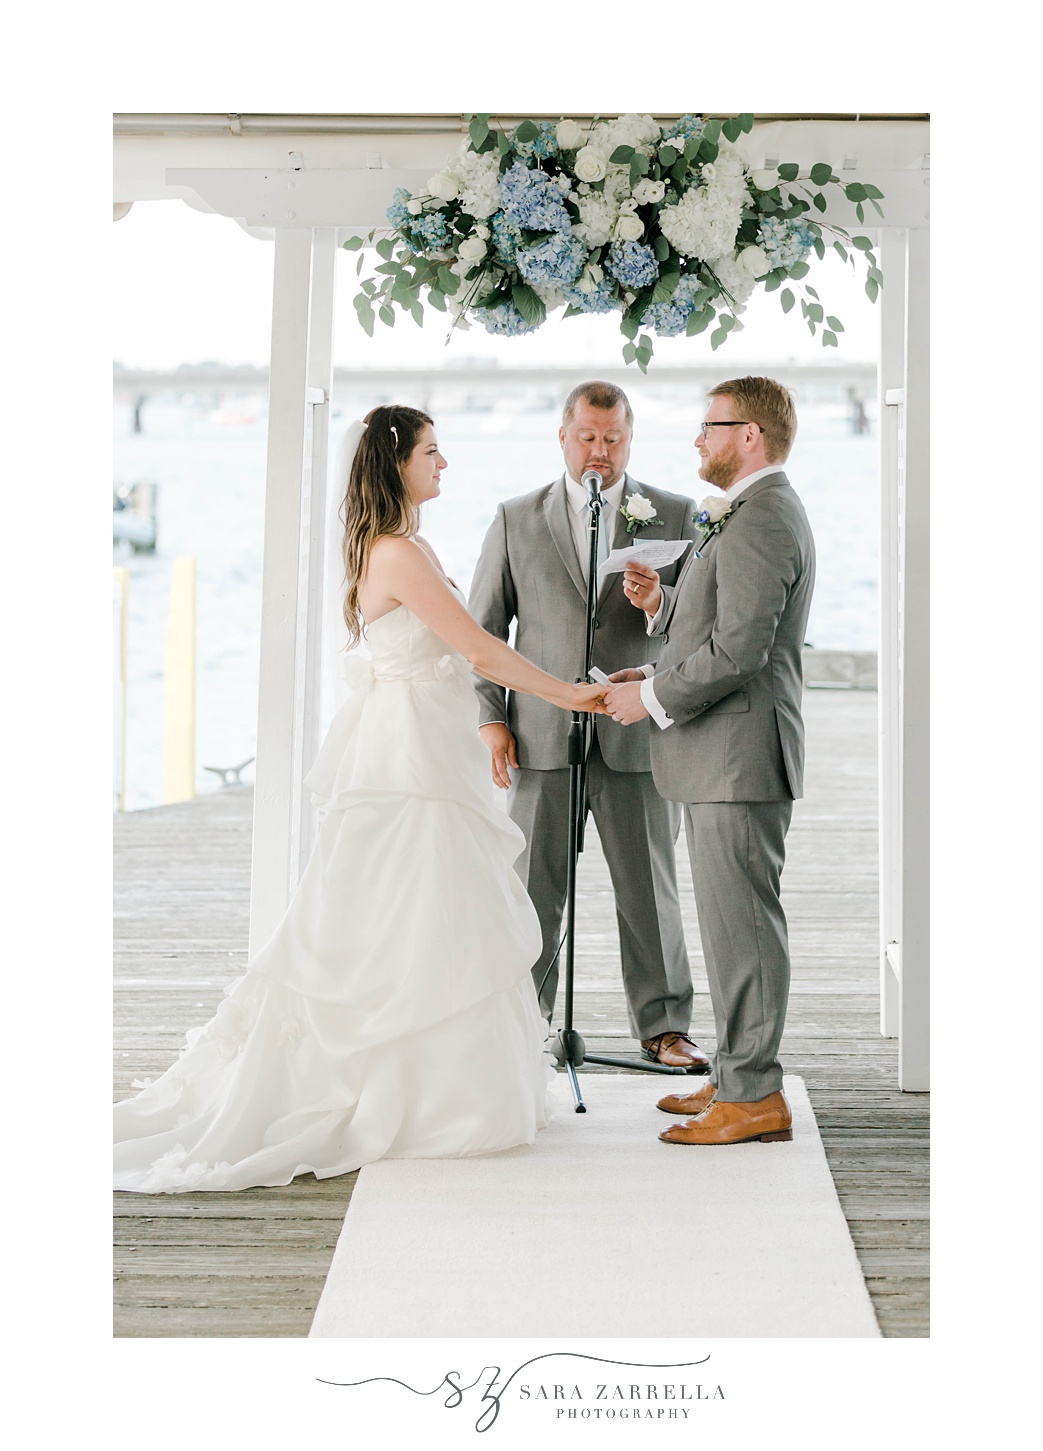 couple exchanges vows during Regatta Place wedding ceremony